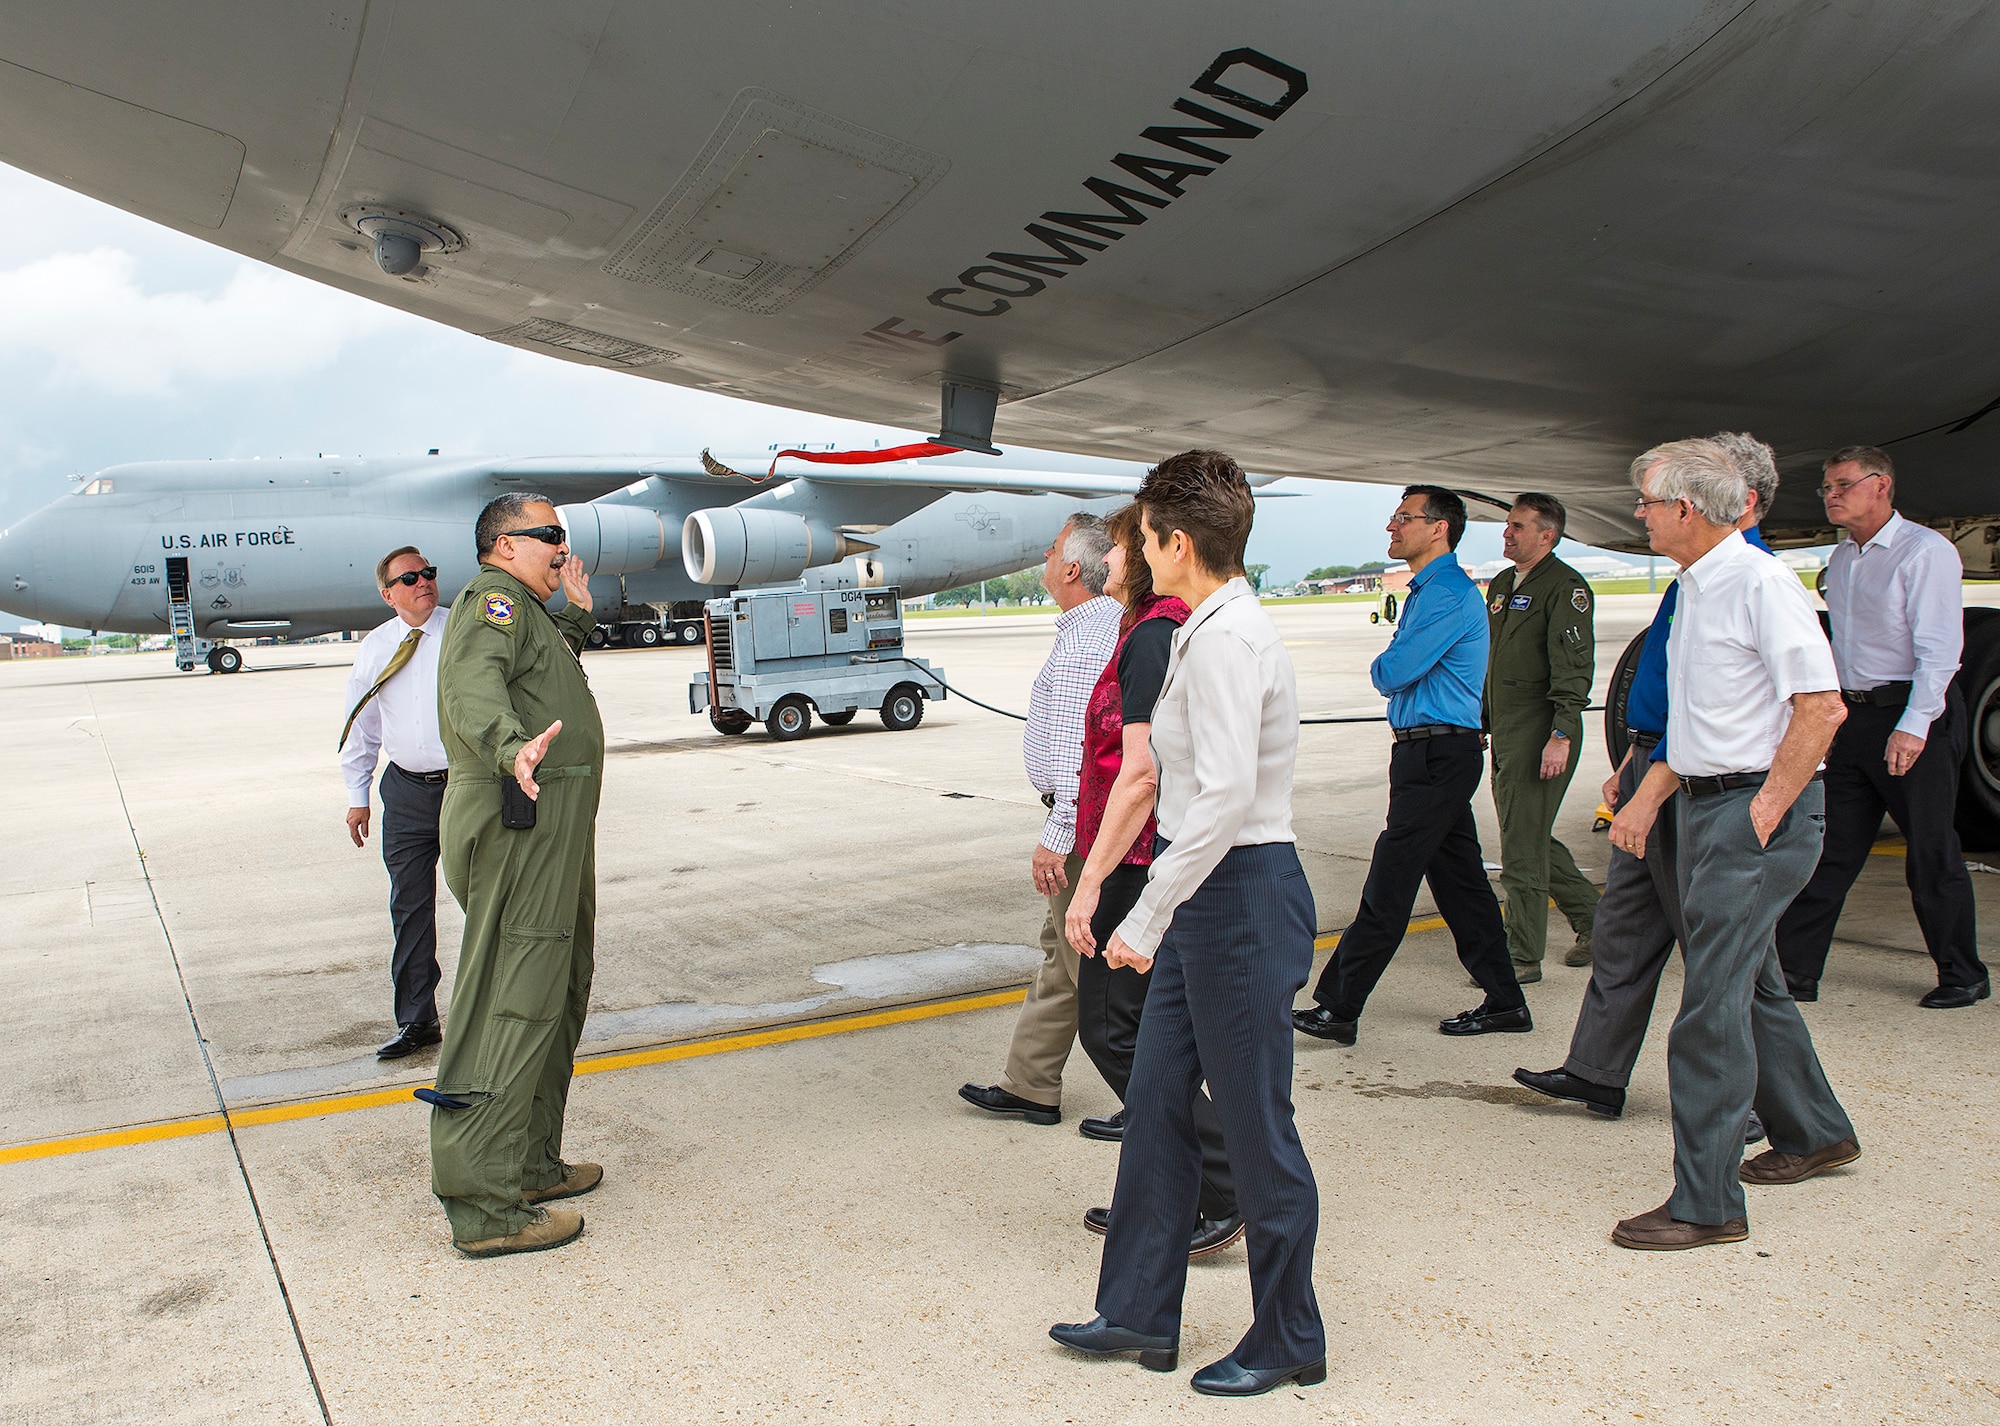 Senior Master Sgt. Robert Reyes, 68th Airlift Squadron flight engineer, gives members of the Air Force Scientific Advisory Board a tour of a C-5M Super Galaxy aircraft April 11, 2017 at Joint Base San Antonio-Lackland, Texas. The SAB is a Federal Advisory Committee that provides independent advice on matters of science and technology relating to the Air Force mission, reporting directly to the Secretary of the Air Force and the Chief of Staff of the Air Force.  (U.S.  Air Force photo by Benjamin Faske)